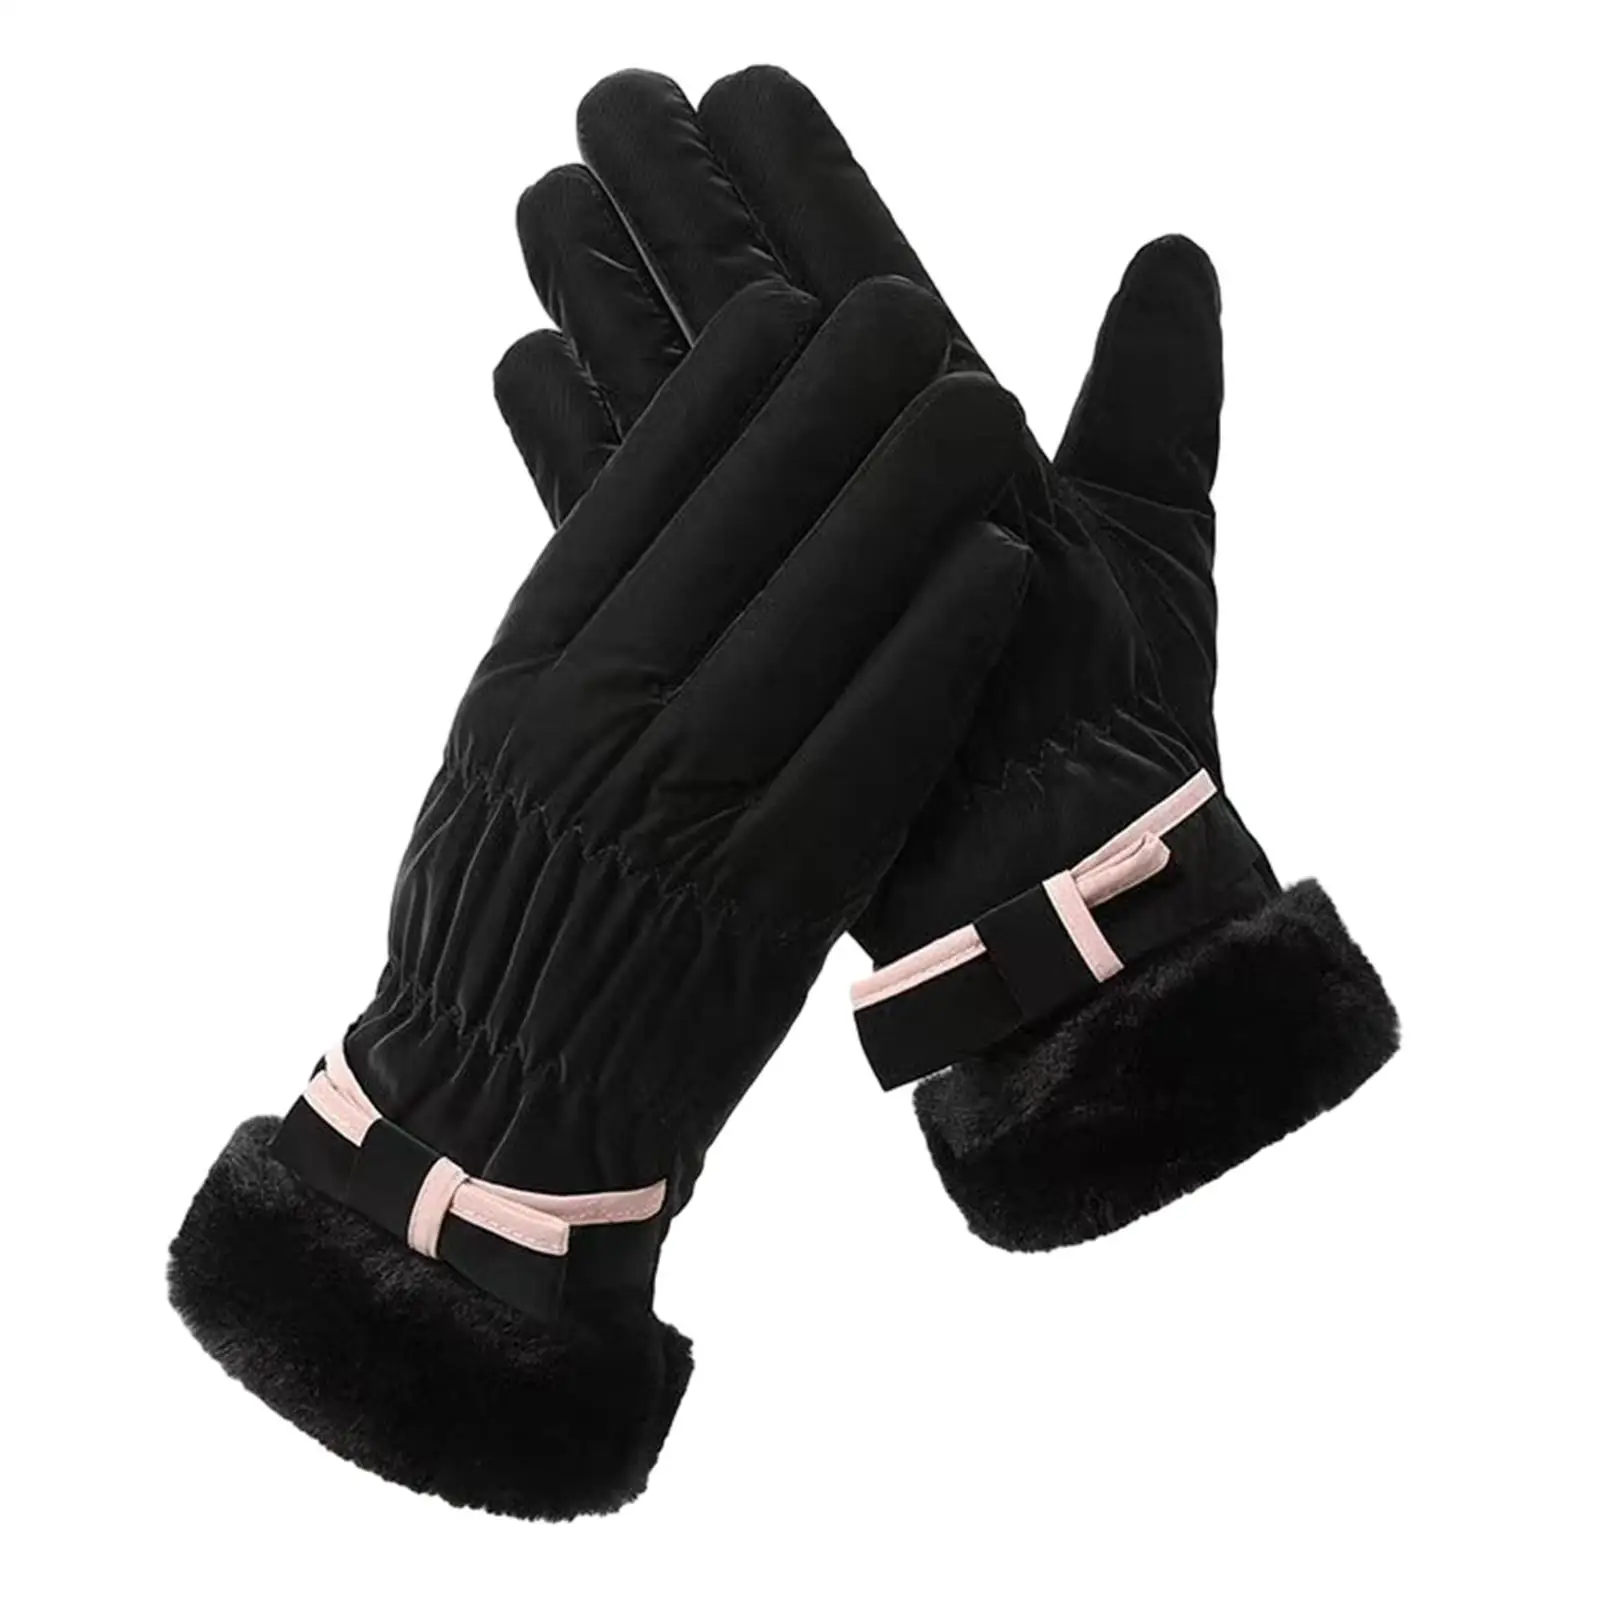 Women Winter Gloves Plush Lined Water Resistant Fashion Cold Weather Gloves for Skiing Motorcycle Work Outdoor Sports Hiking